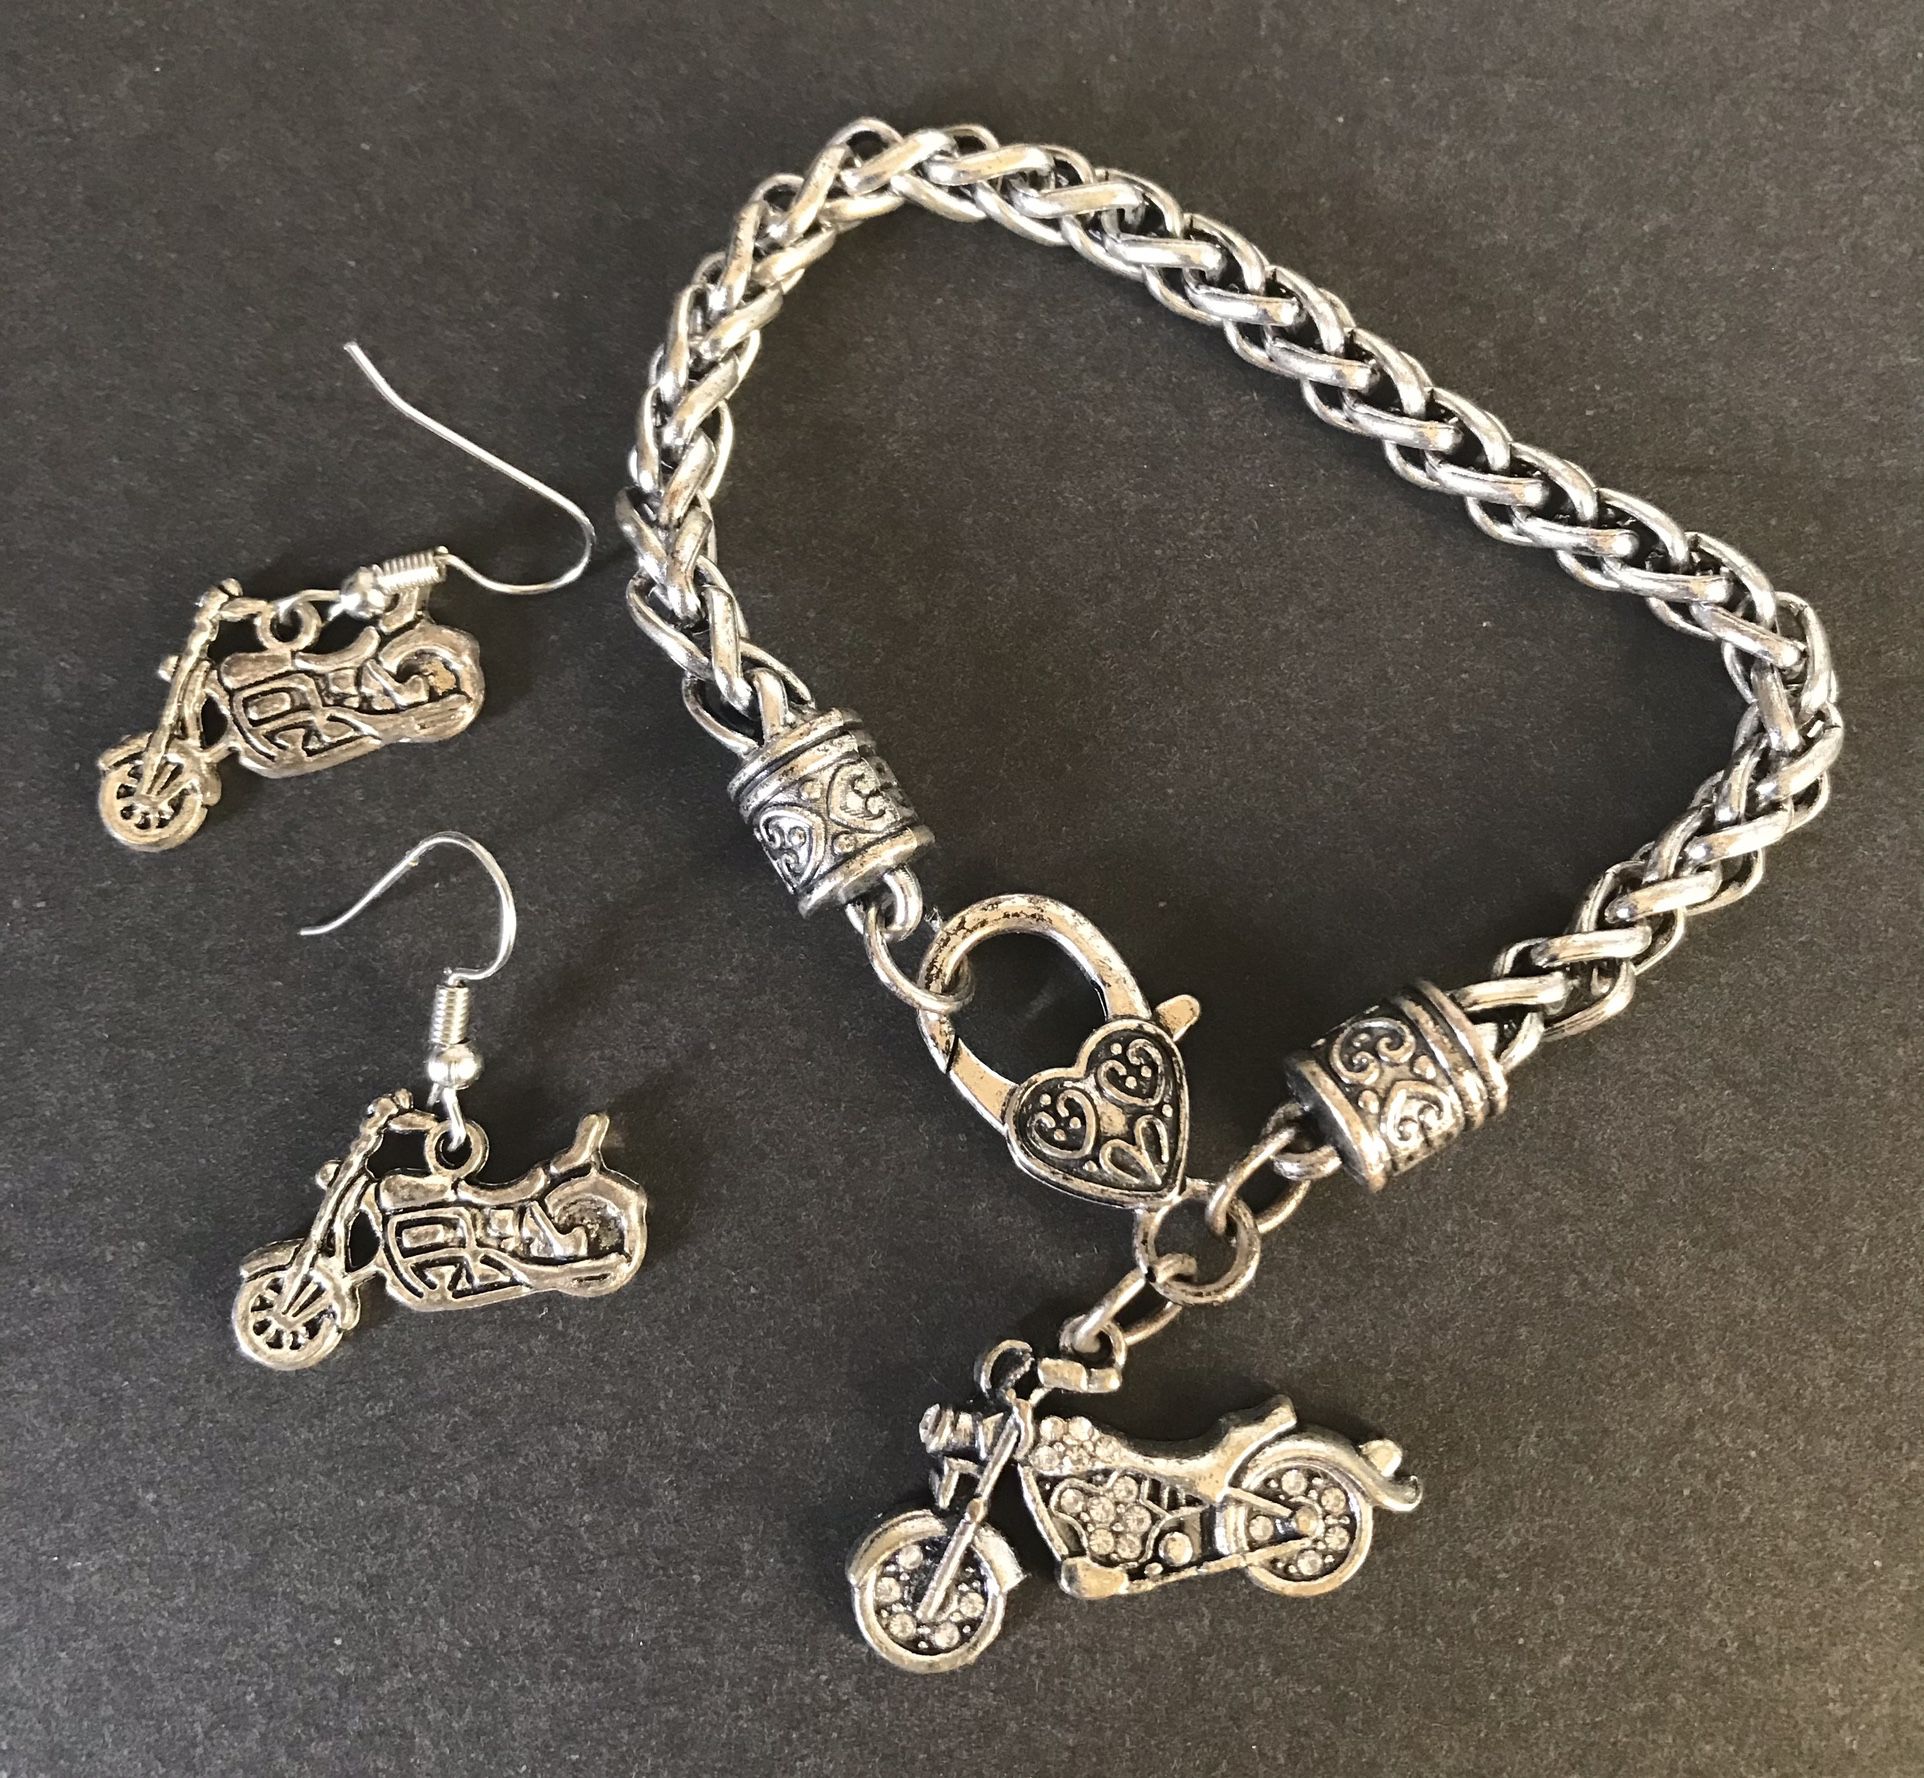 Woman’s Motorcycle Earring And Bracelet Set